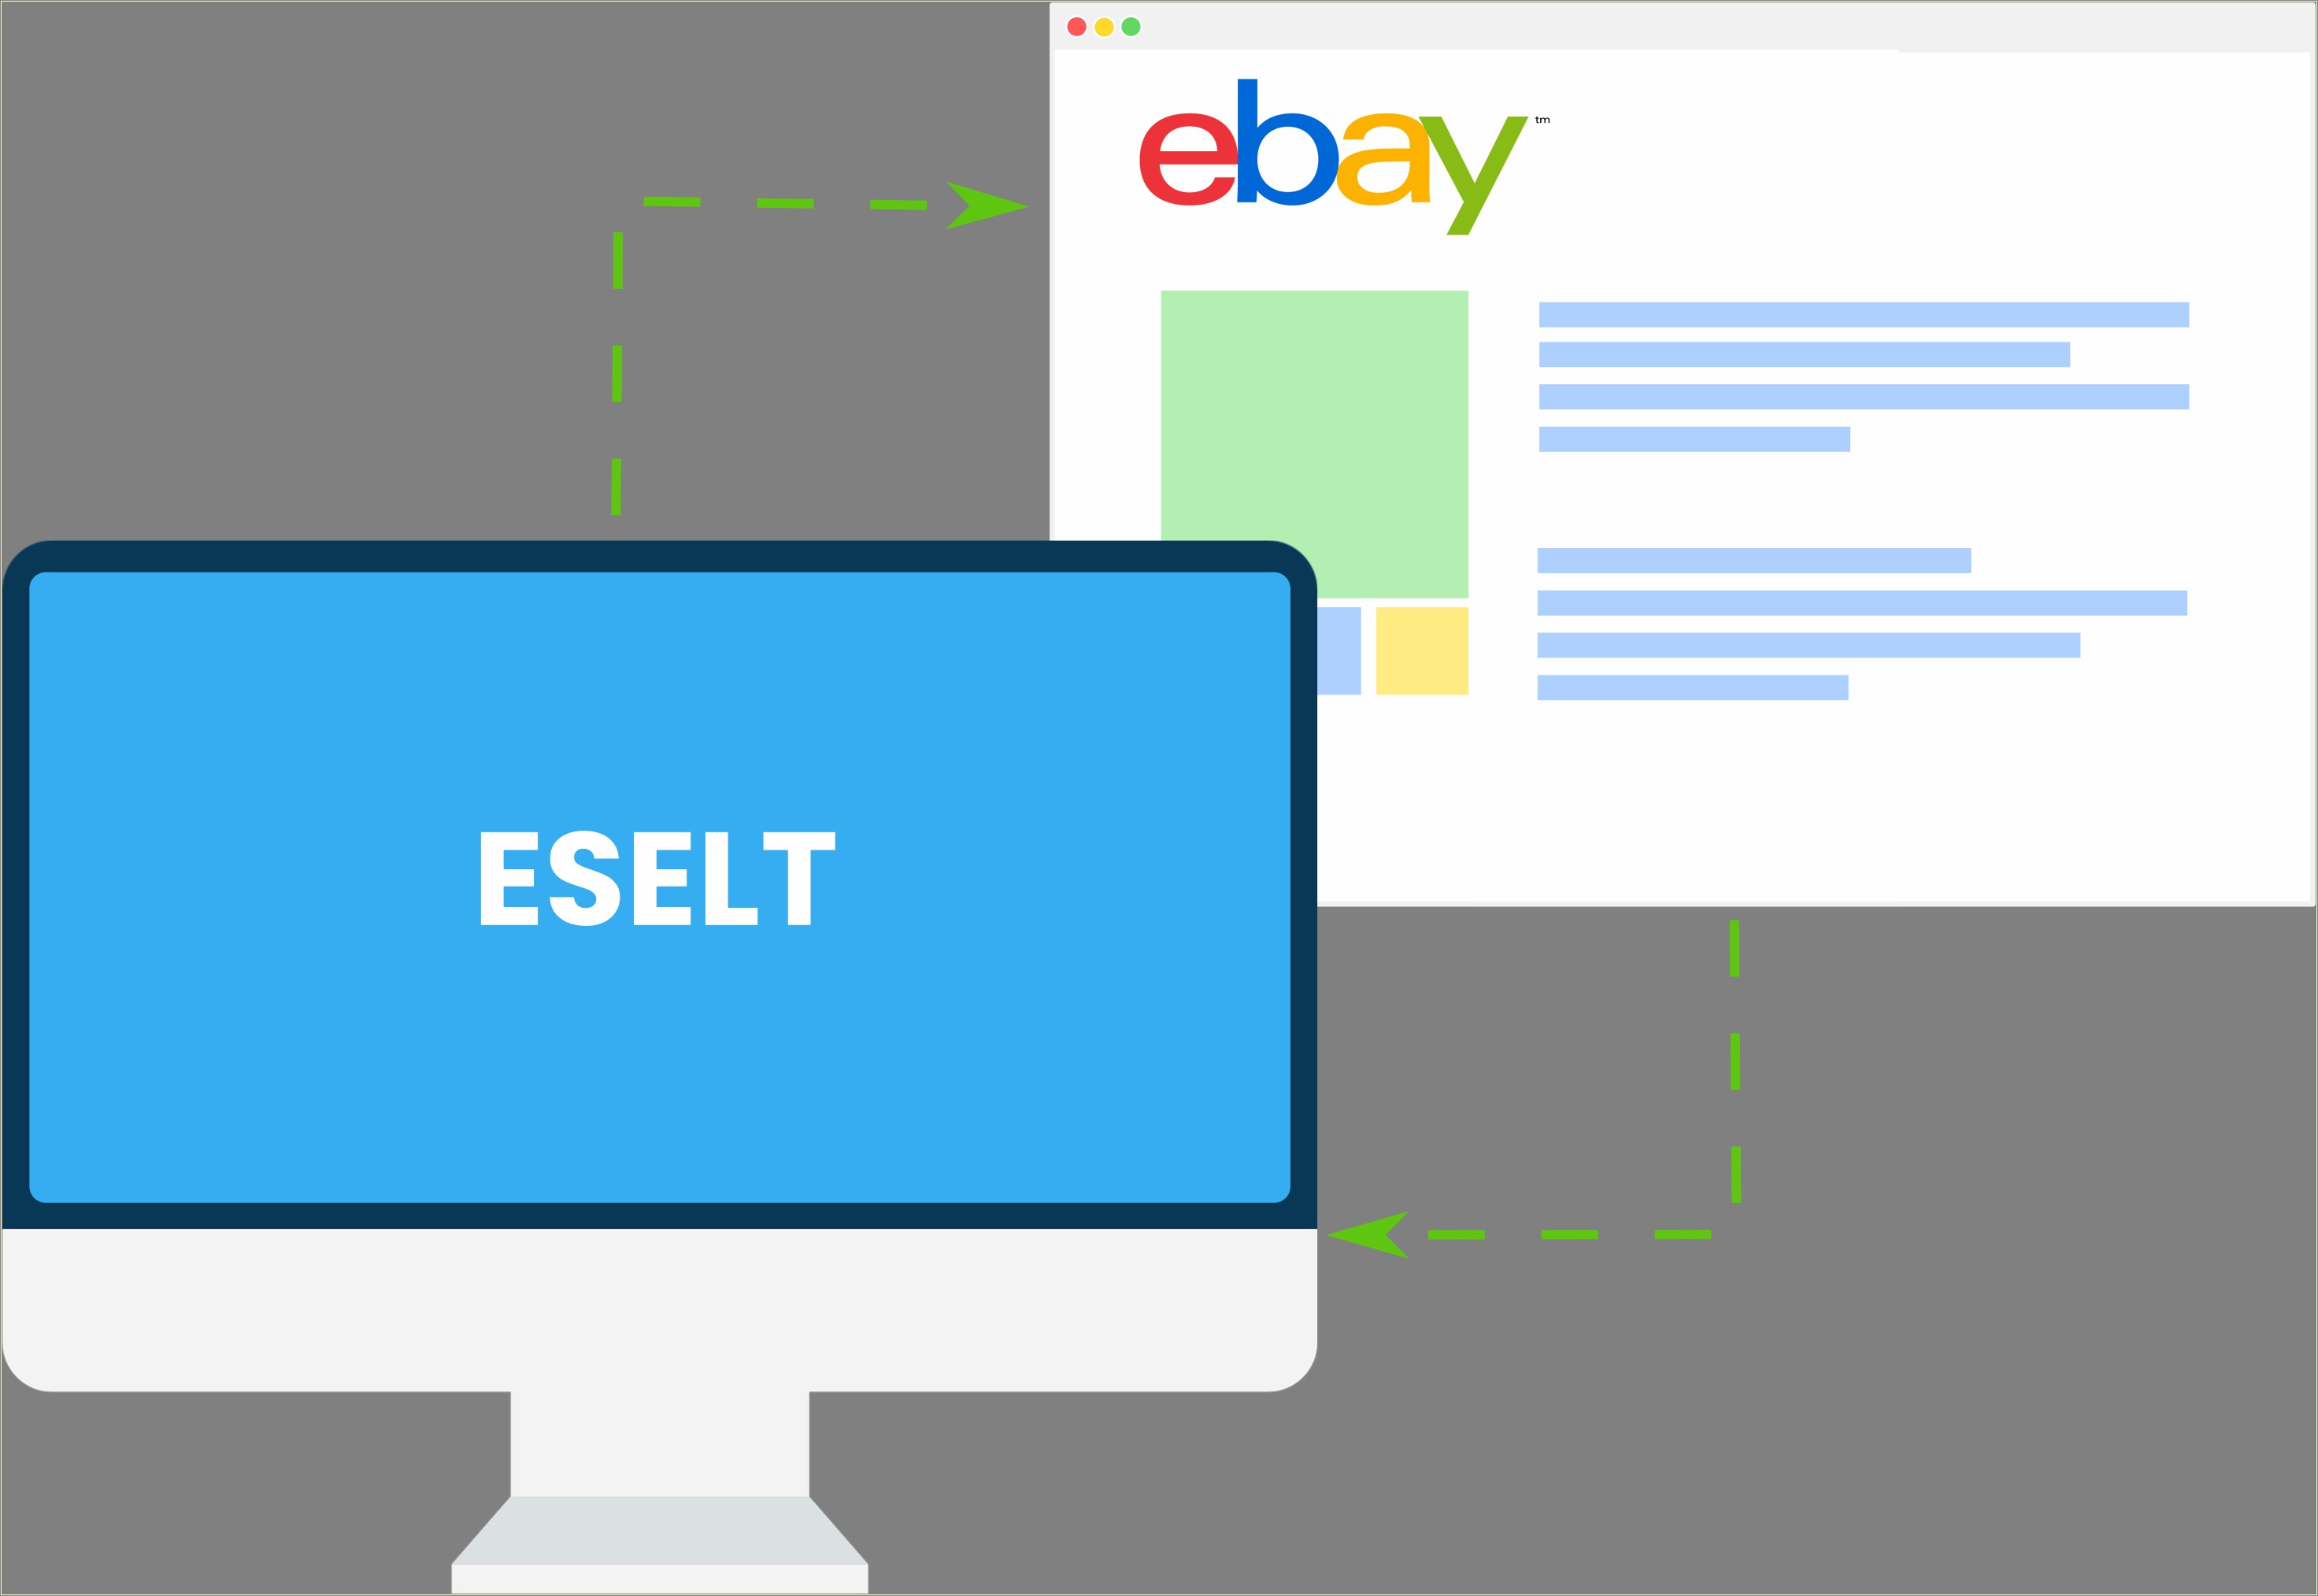 Free Ebay Image Hosting And Templates